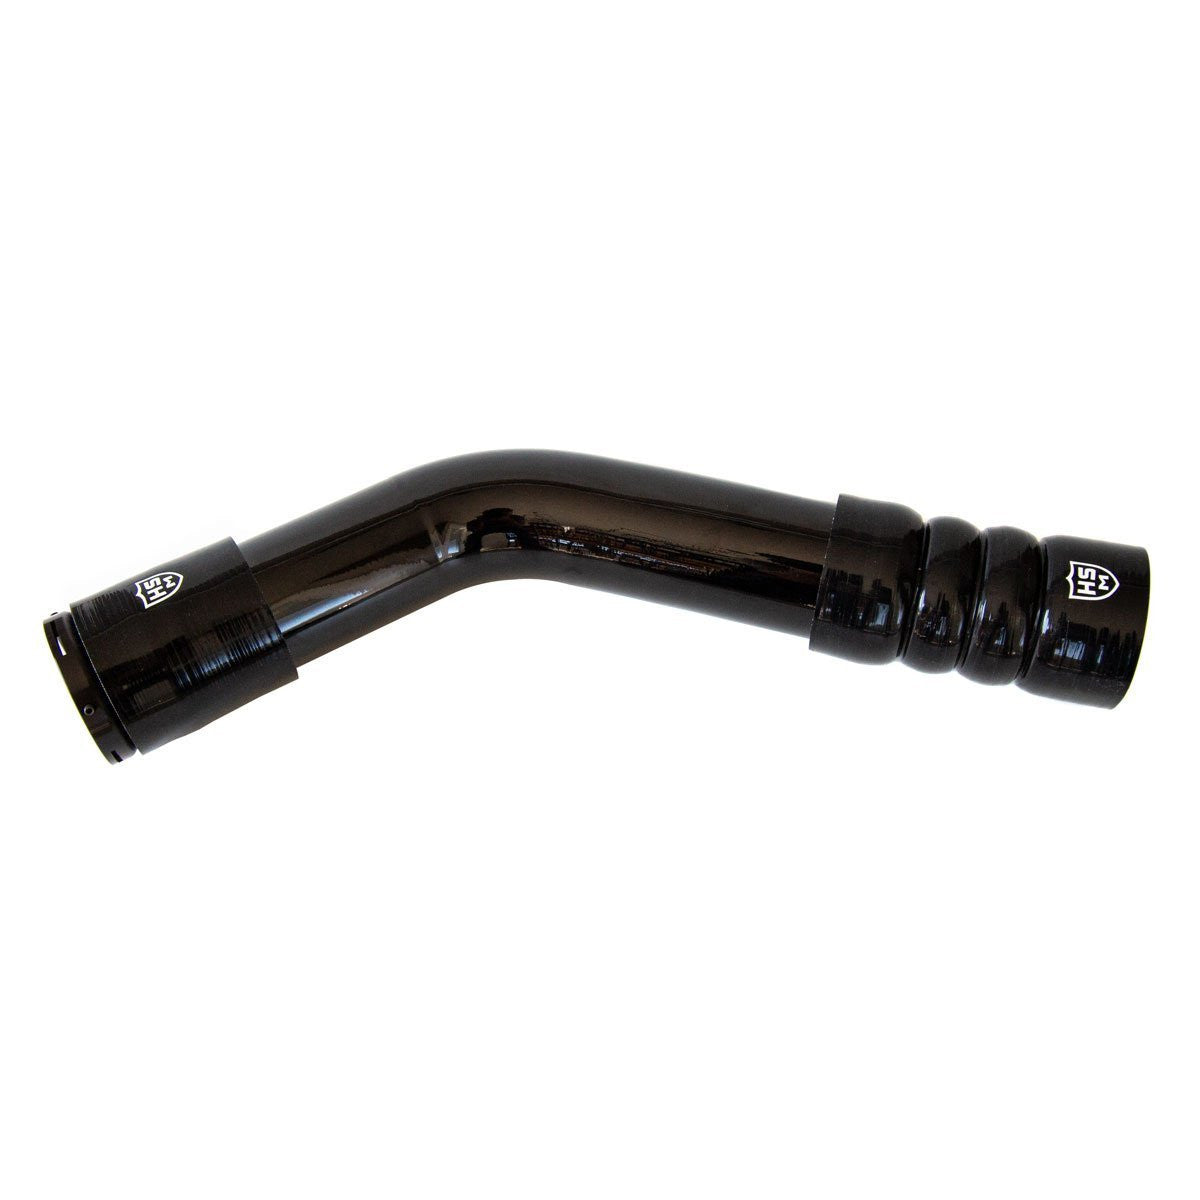 11-19 Ford 6.7L Hot Side Intercooler Pipe Upgrade Kit - INTERCOOLER PIPE - HS Motorsports - Texas Complete Truck Center